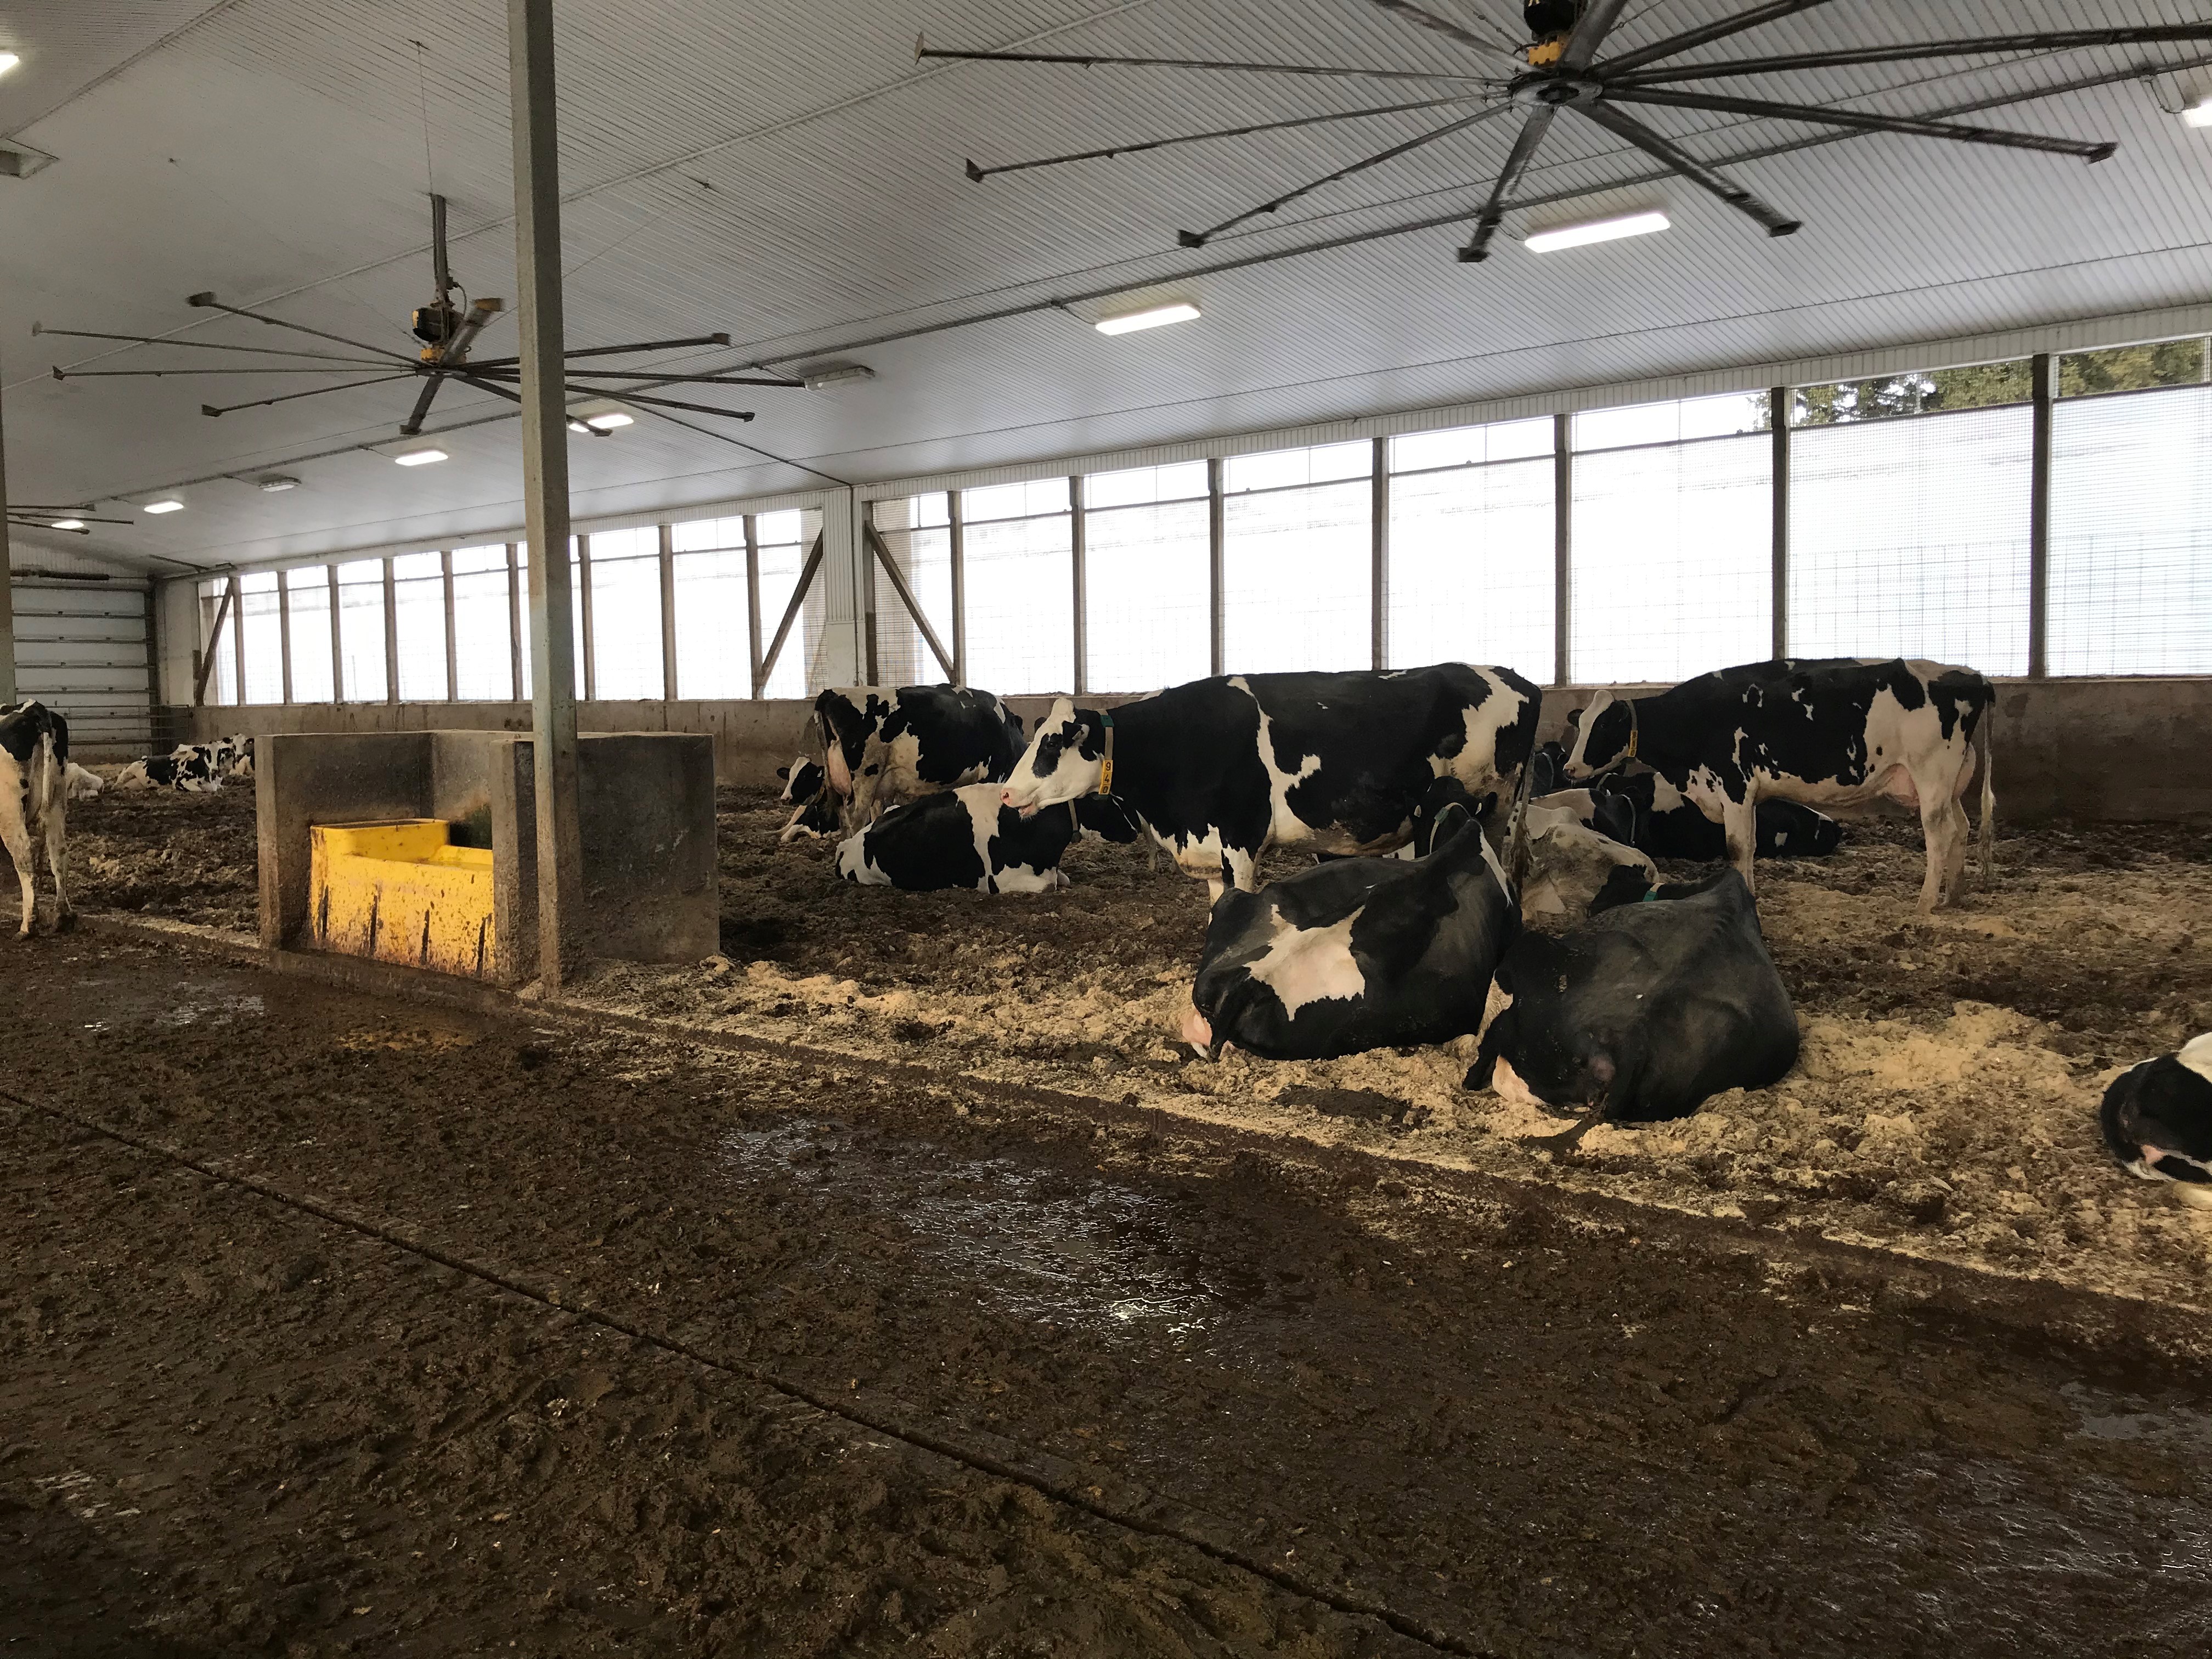 Compost-bedded pack barn with continuous access to the feed alley